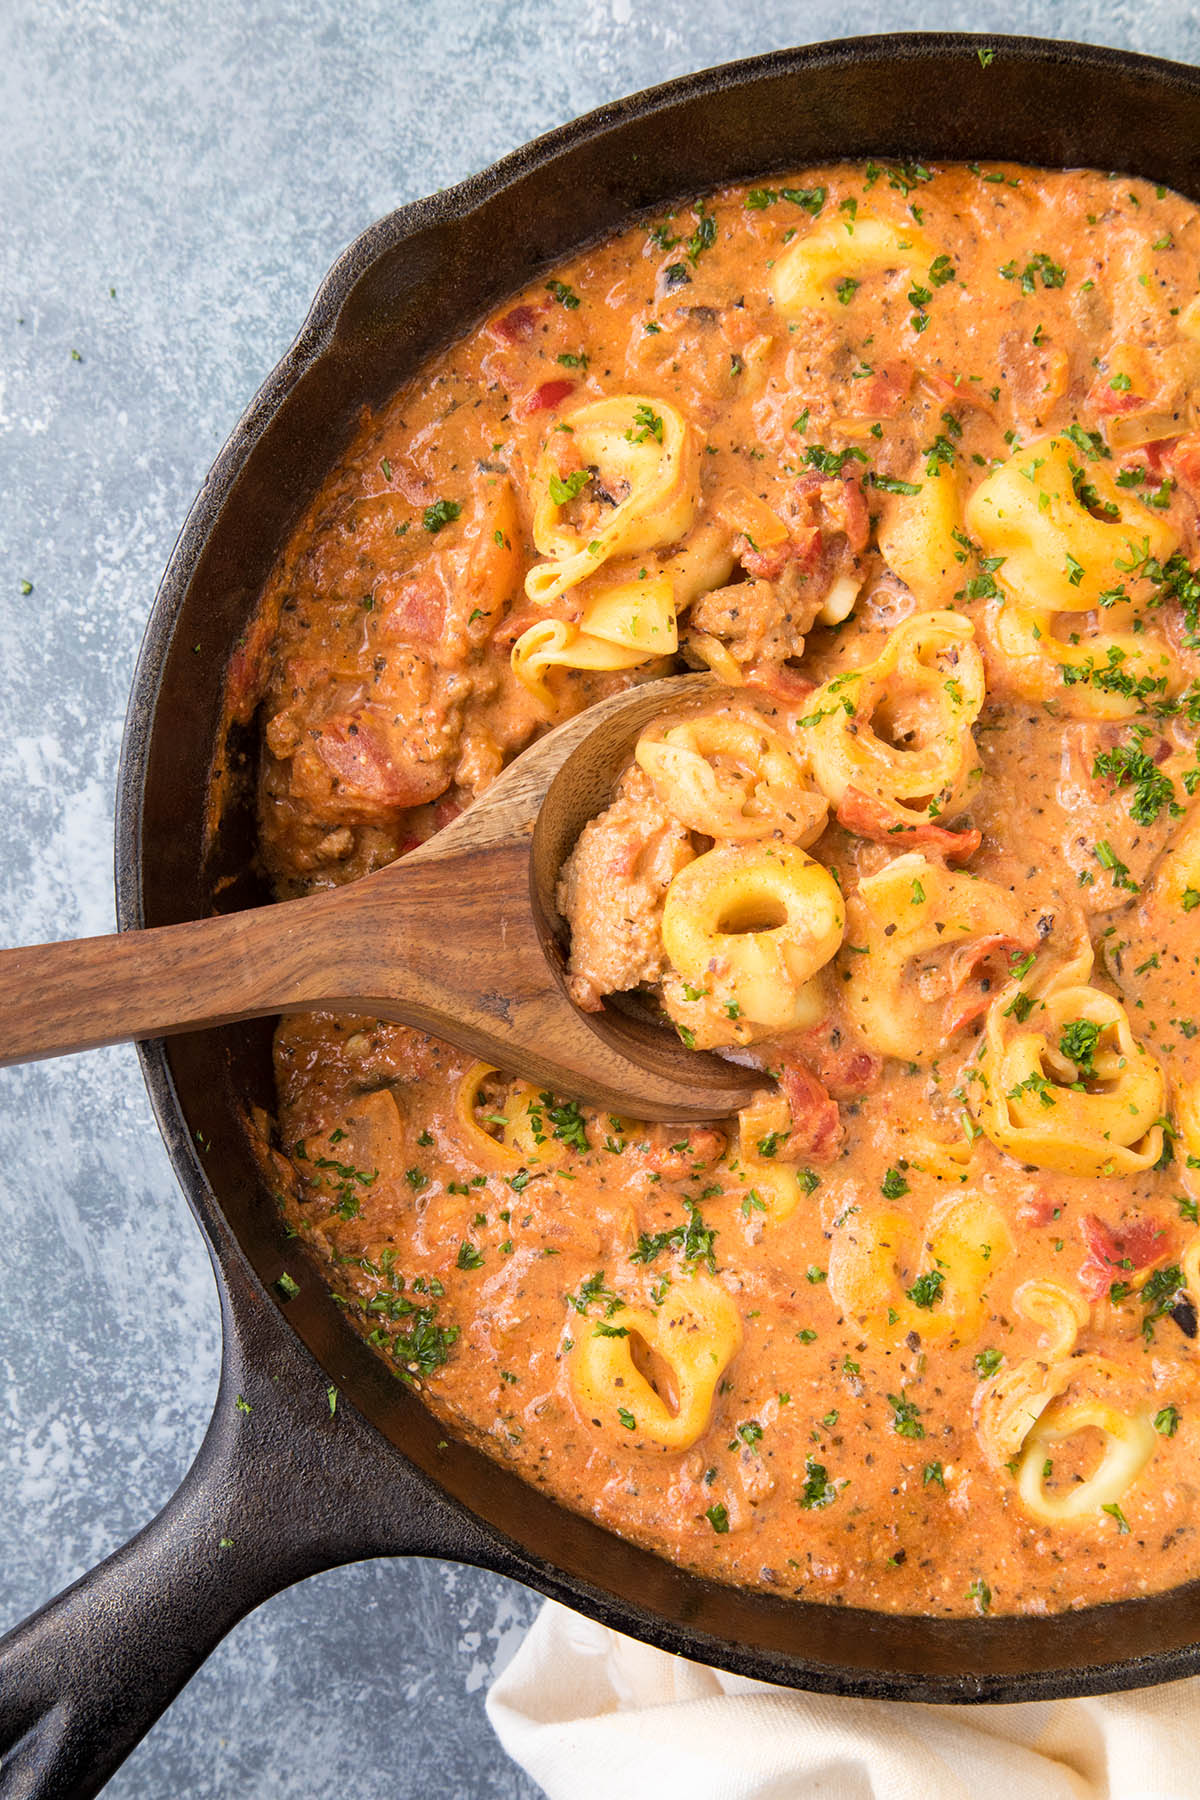 A Big Pan of Creamy Tortellini Pasta with Fire Roasted Tomatoes